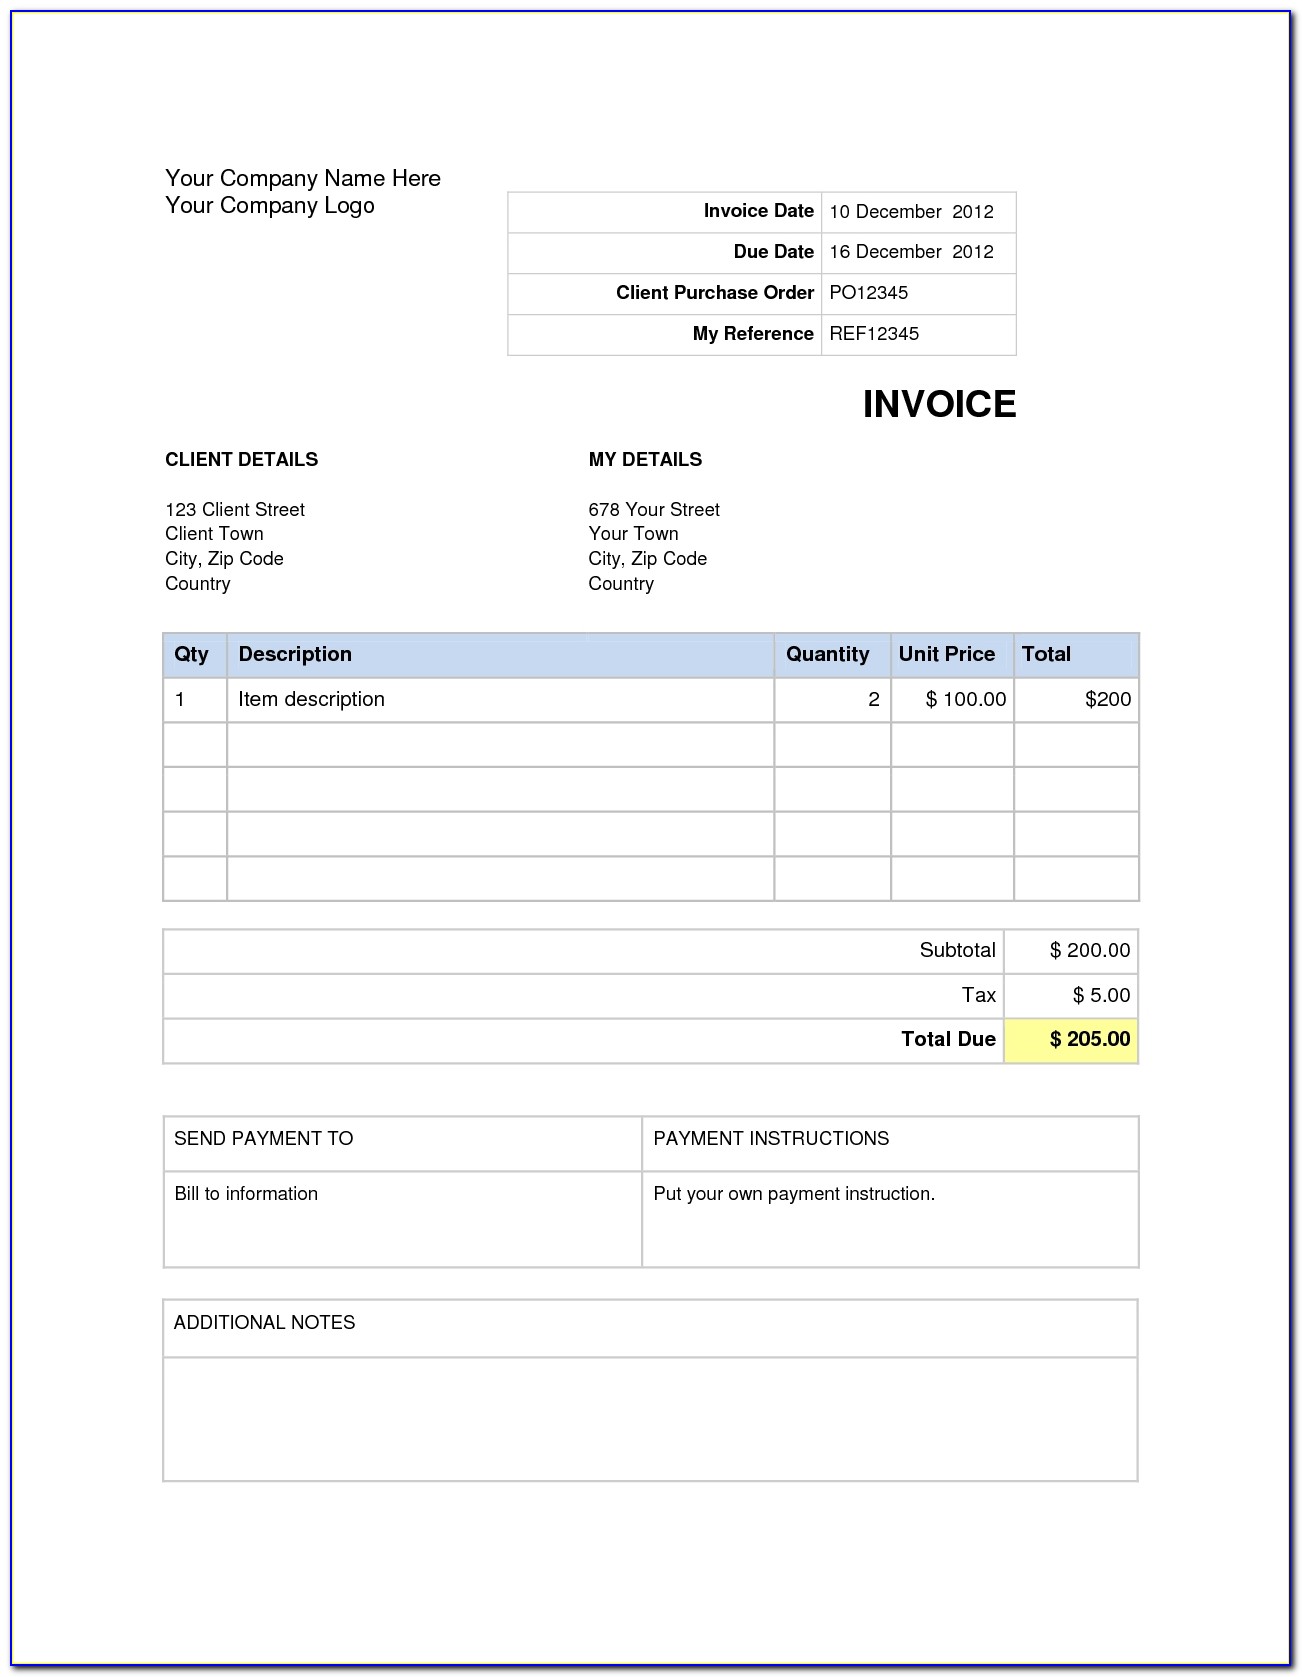 Invoice Format In Word For Hotel